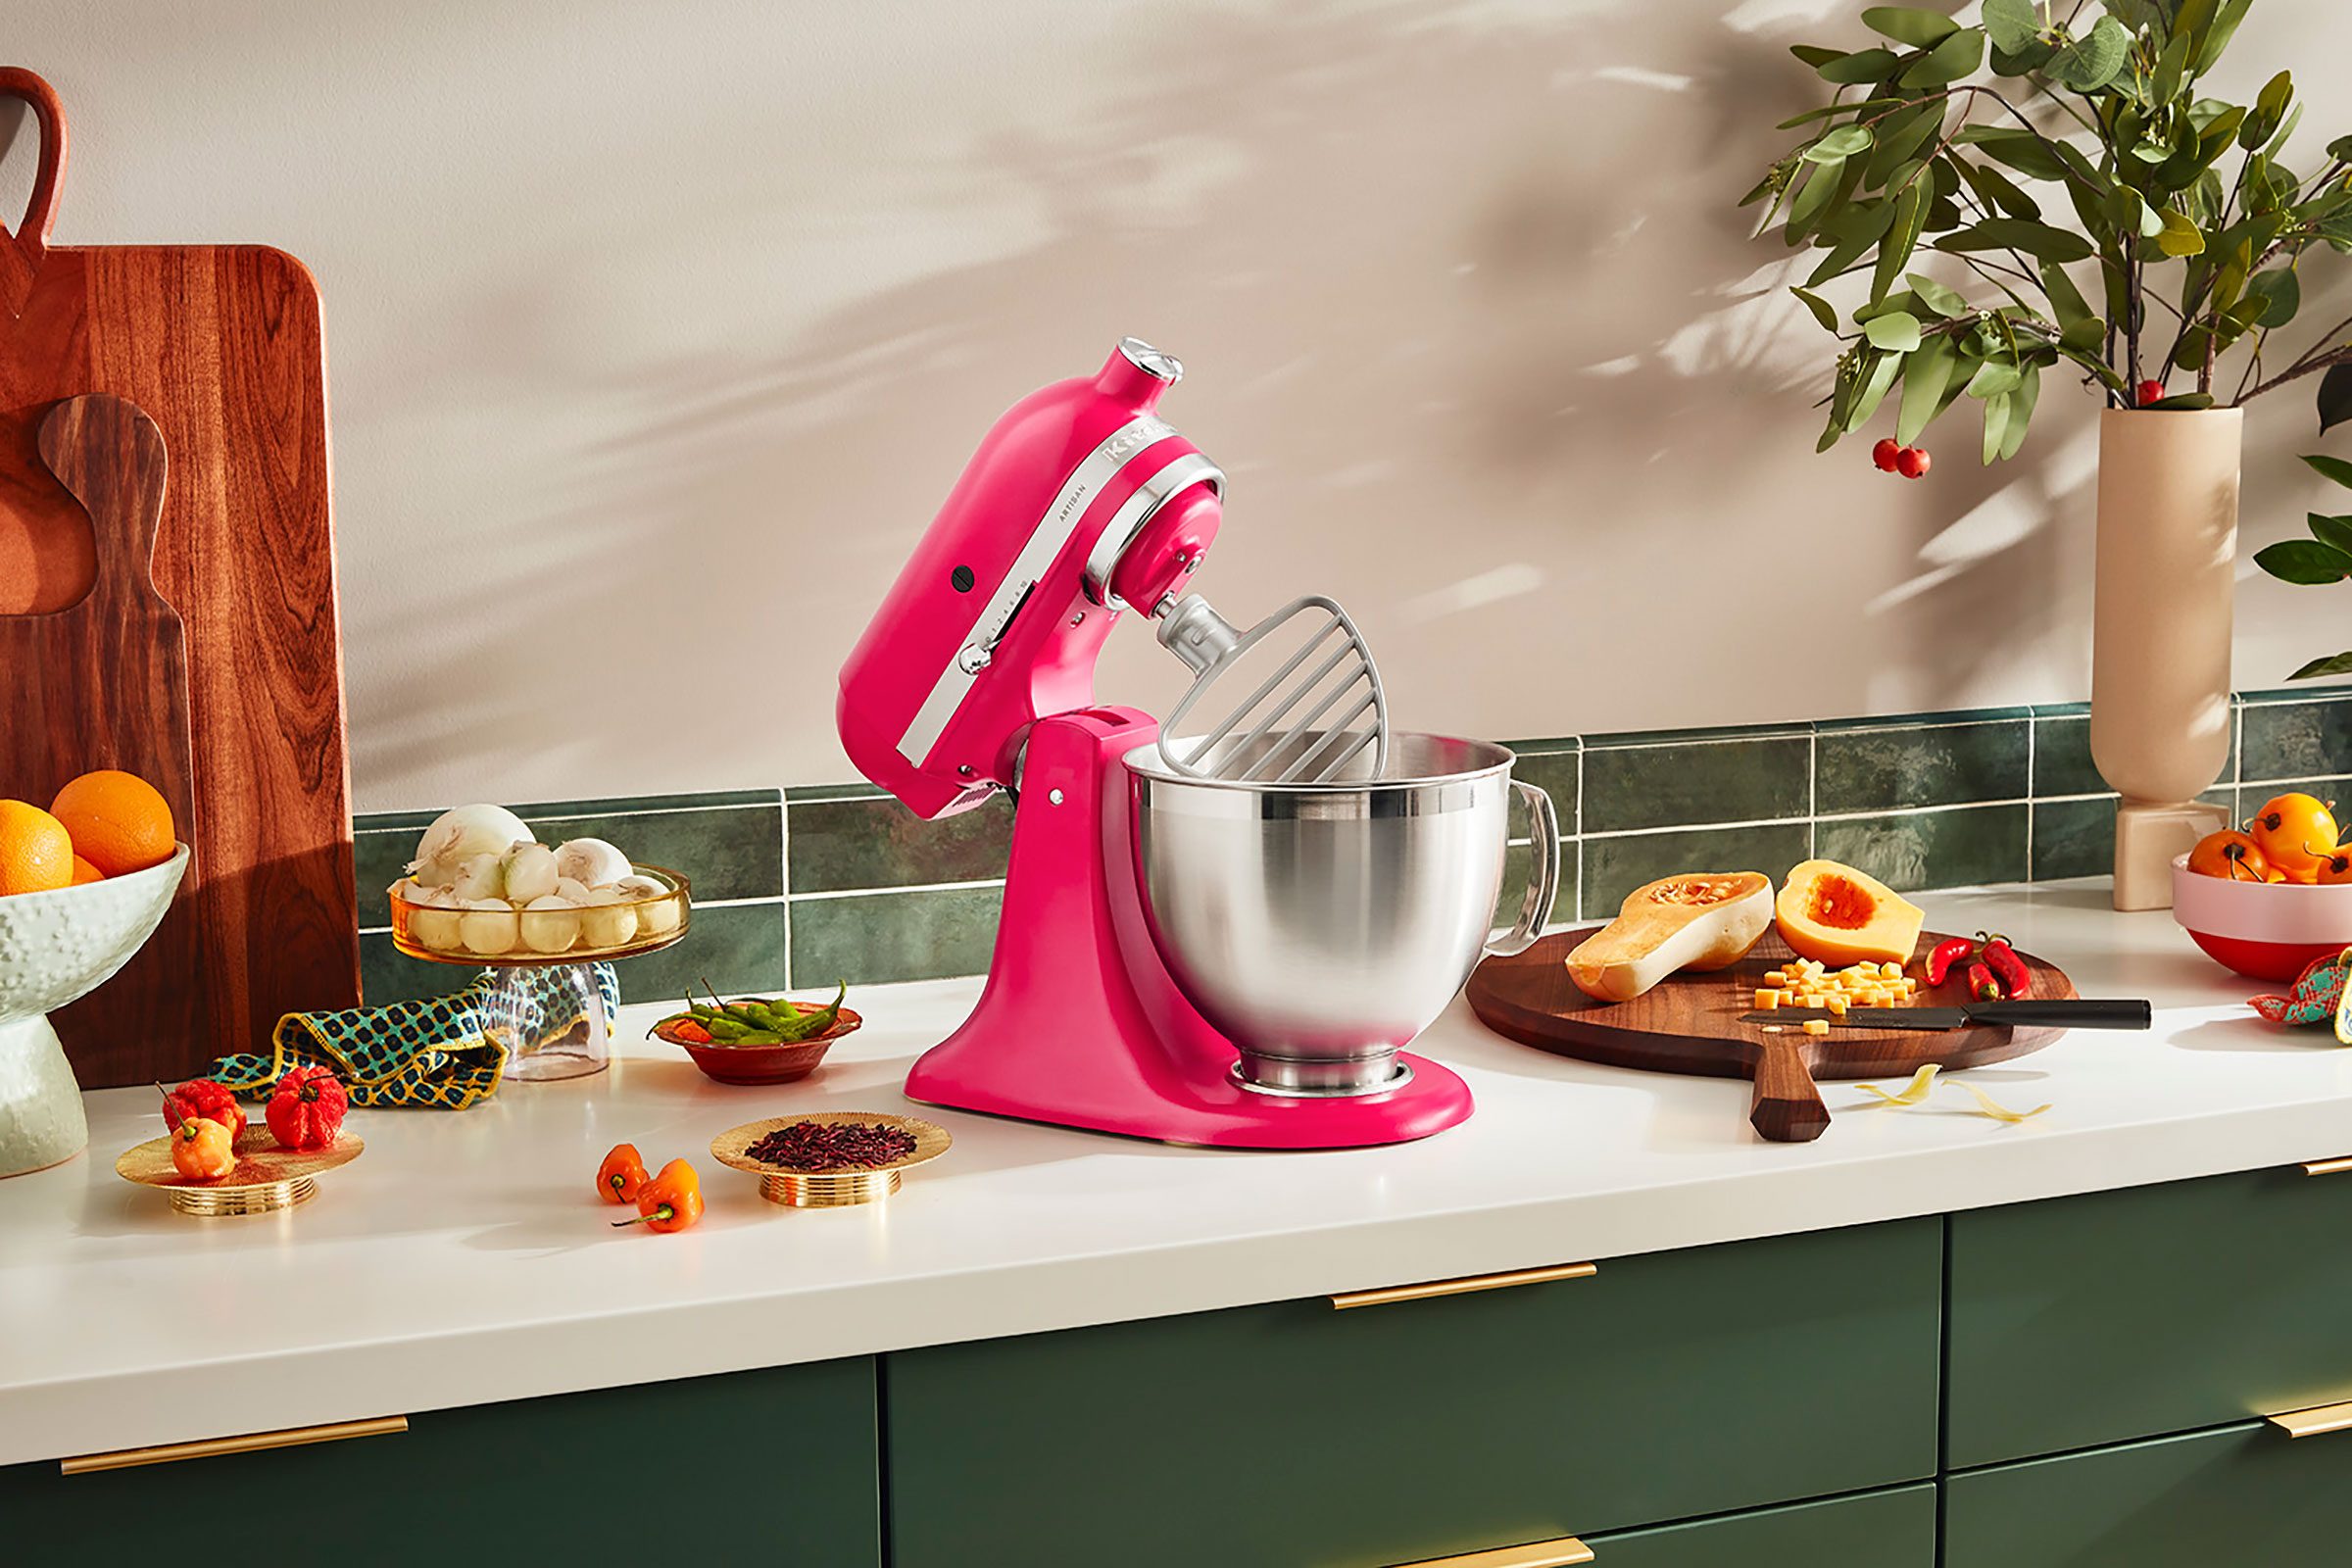 https://www.tasteofhome.com/wp-content/uploads/2022/02/Kitchen-Aid-Color-of-the-Year-2023-Hibiscus-Mixer-Resize-Crop-Courtesy-Kitchen-Aid.jpg?fit=700%2C1024